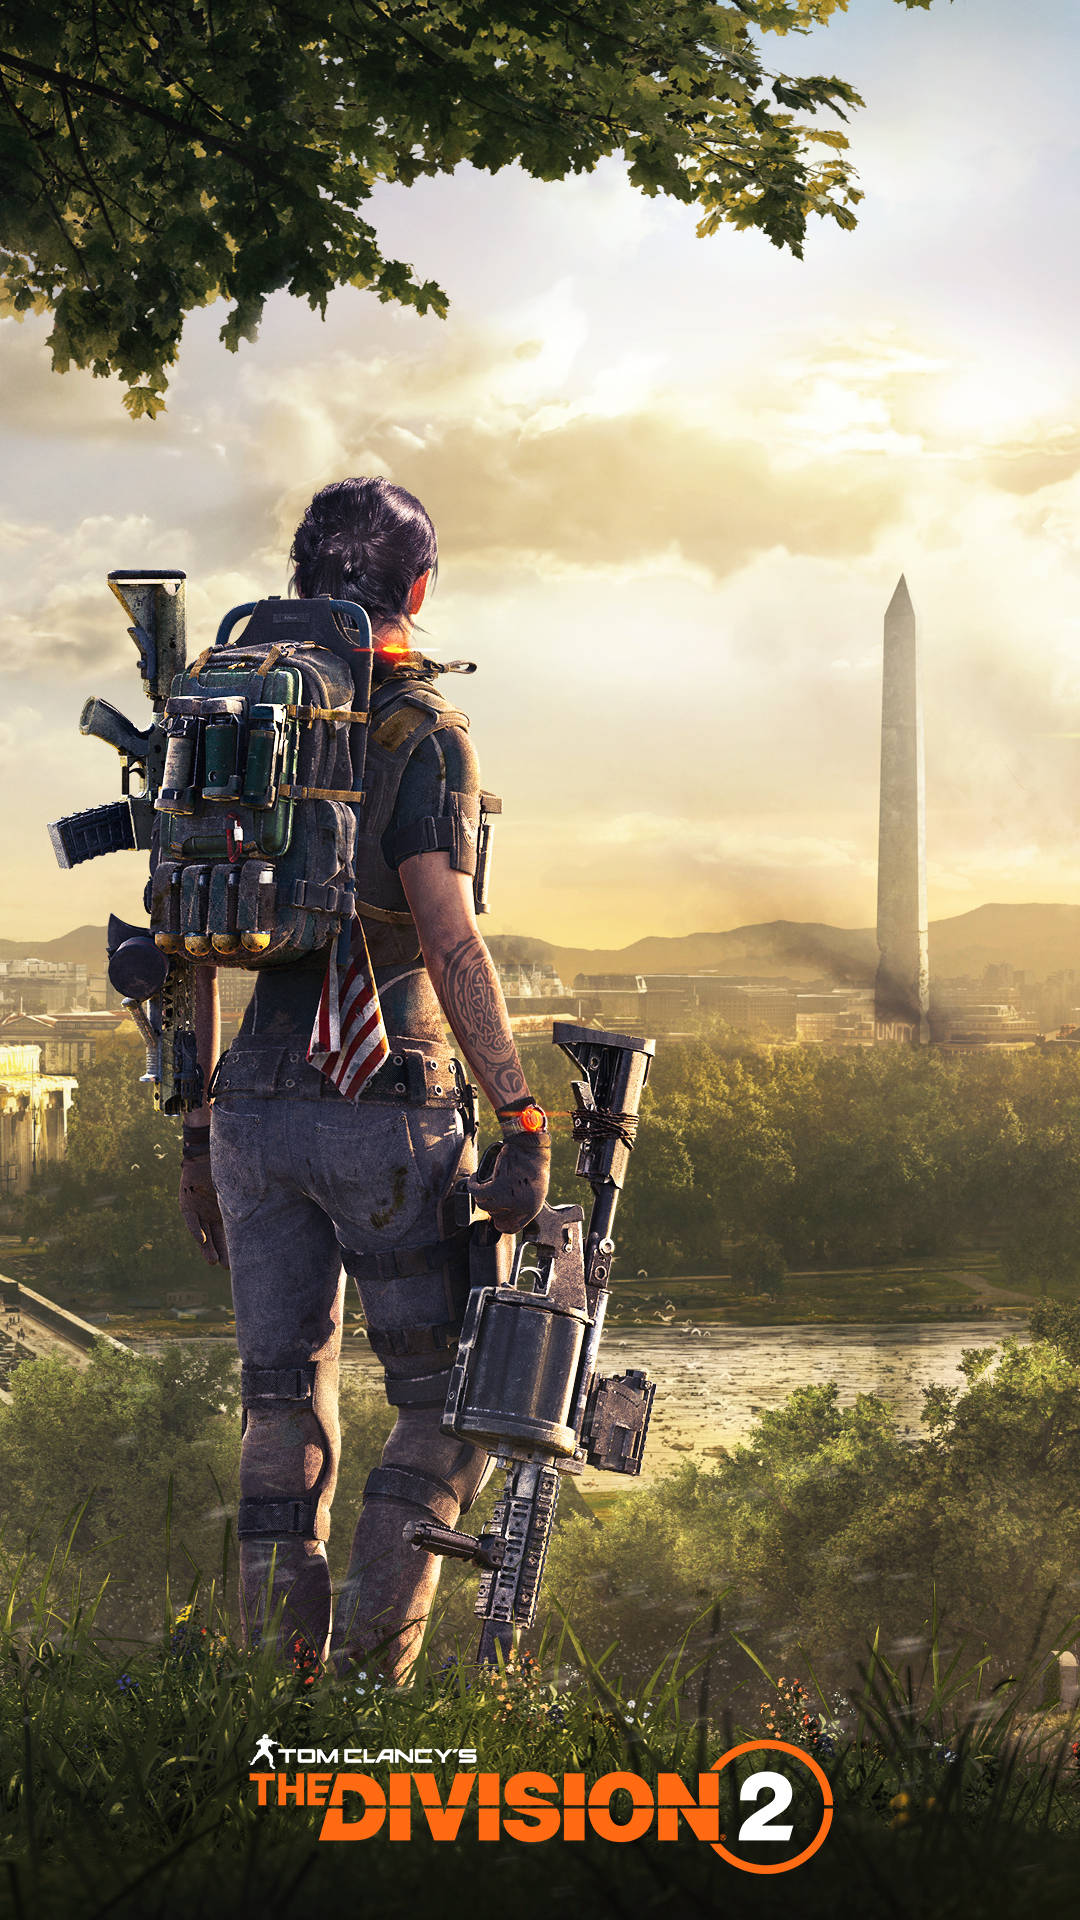 The phone of The Division 2 - A valuable piece of technology Wallpaper